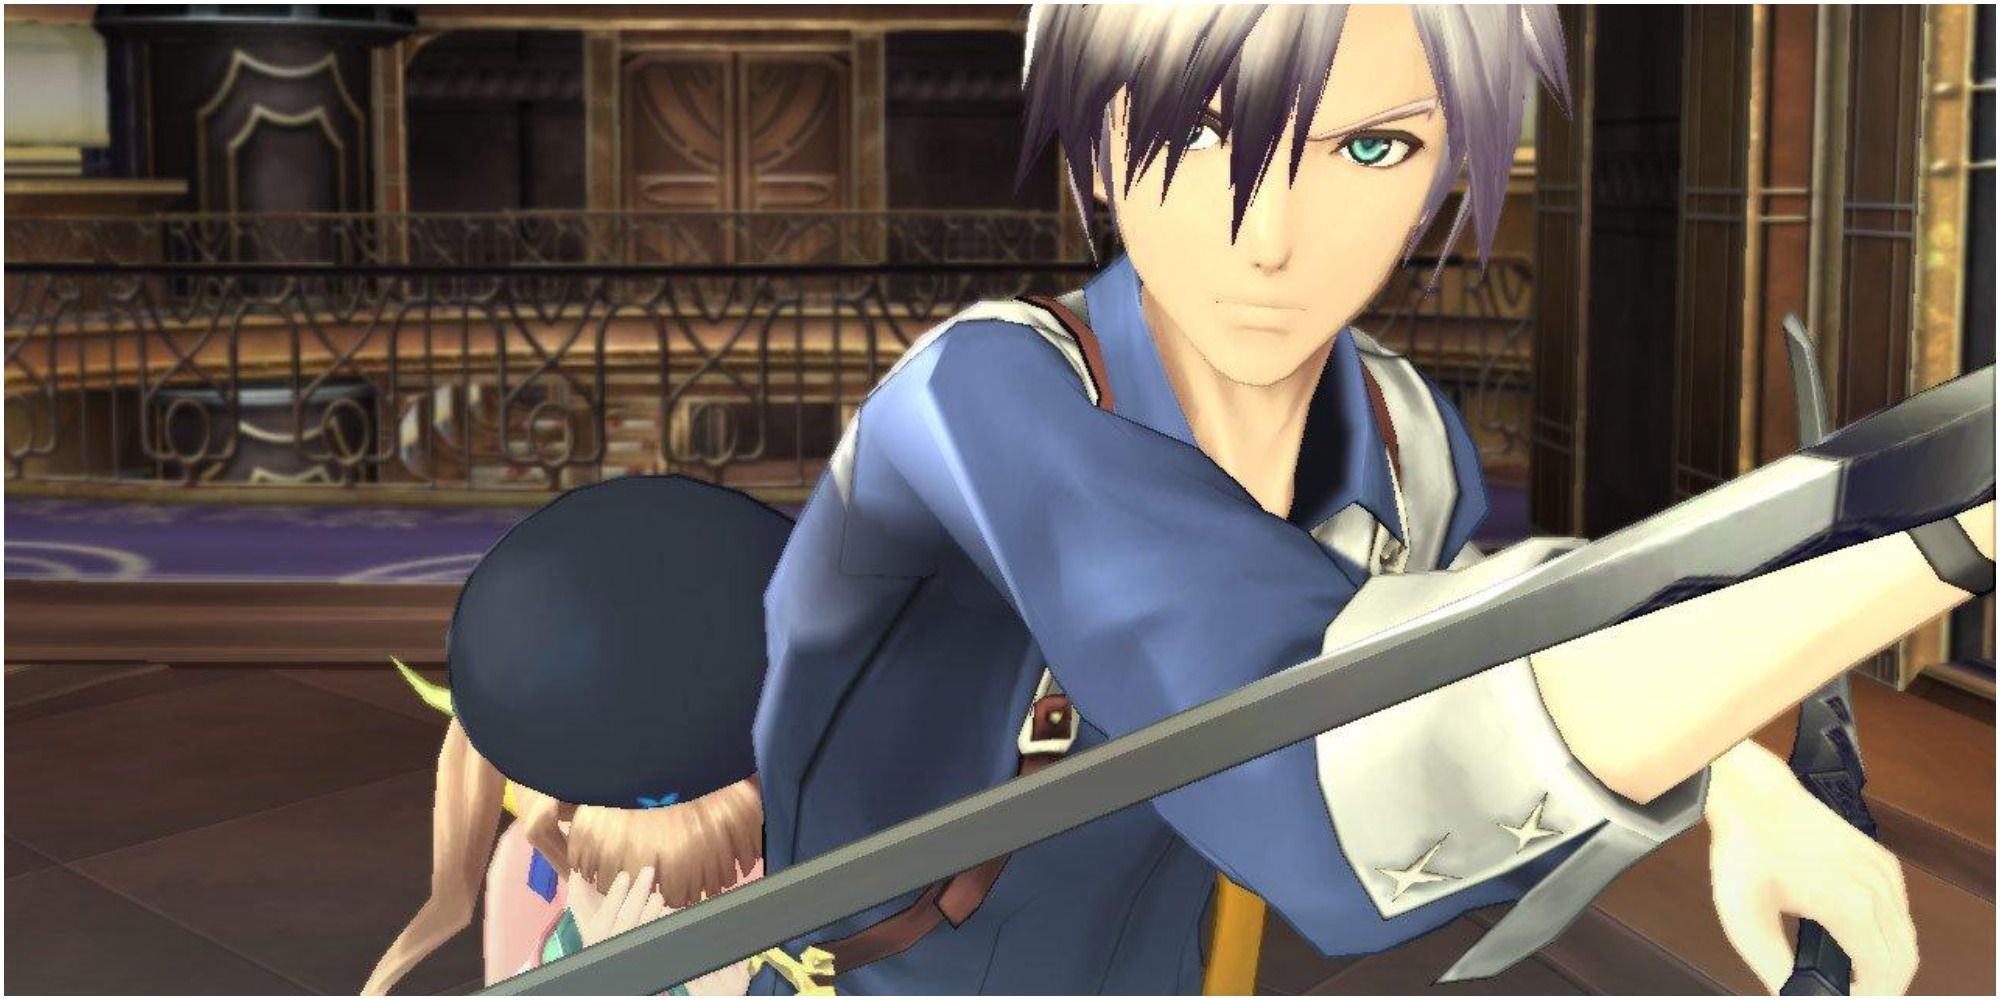 Ludgar protecting Elle in Tales of Xillia 2